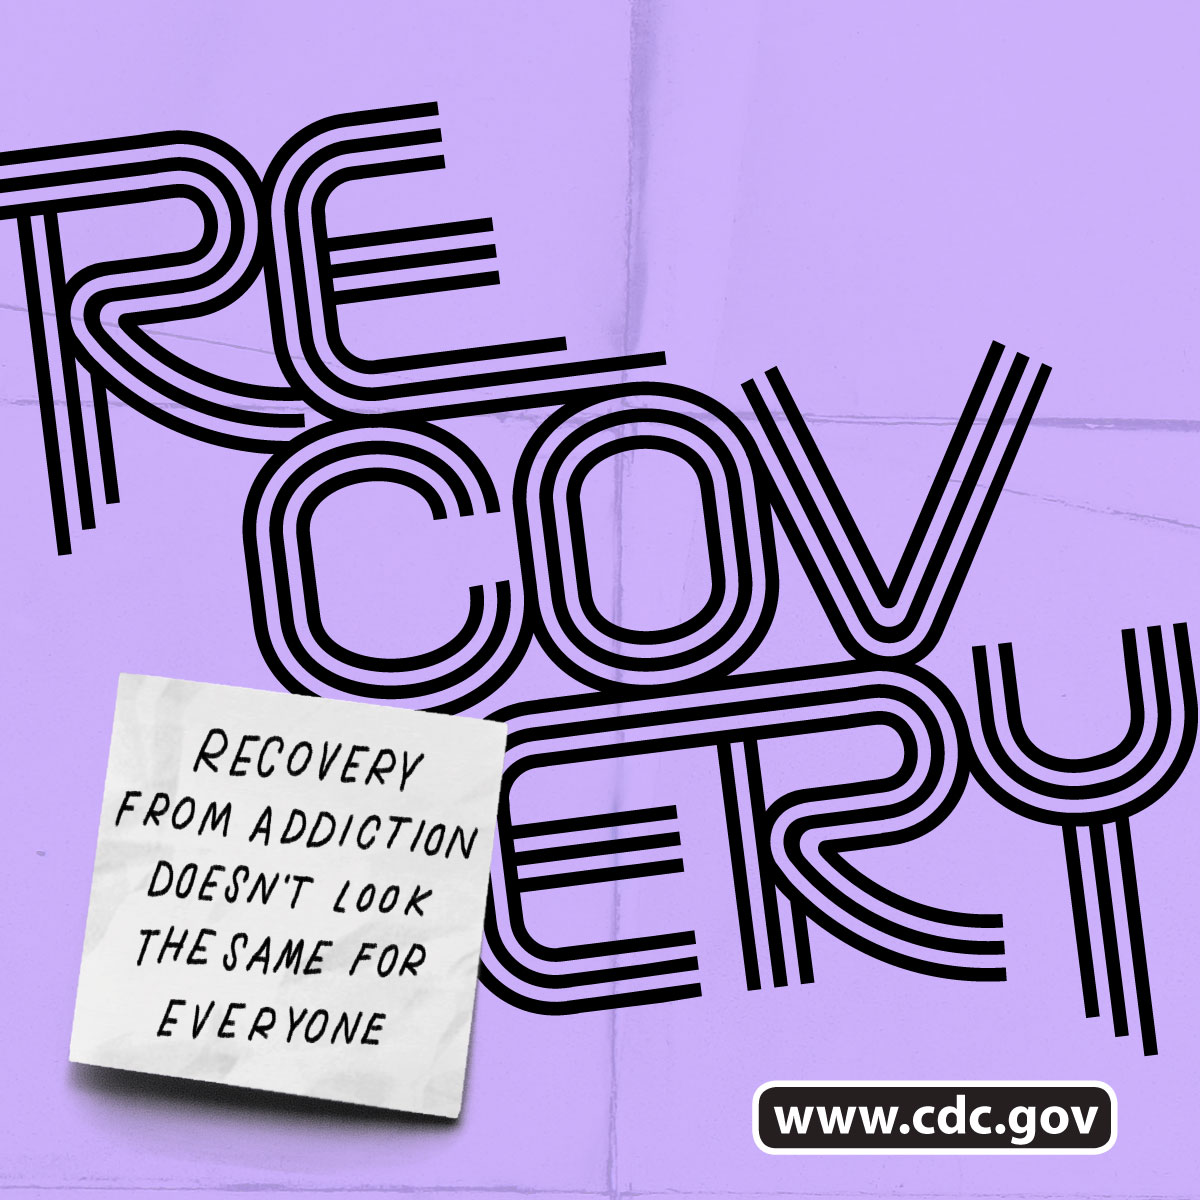 CDC_Stigma-Static-A-1200x1200_Recovery-Doesn't-Look-the-Same